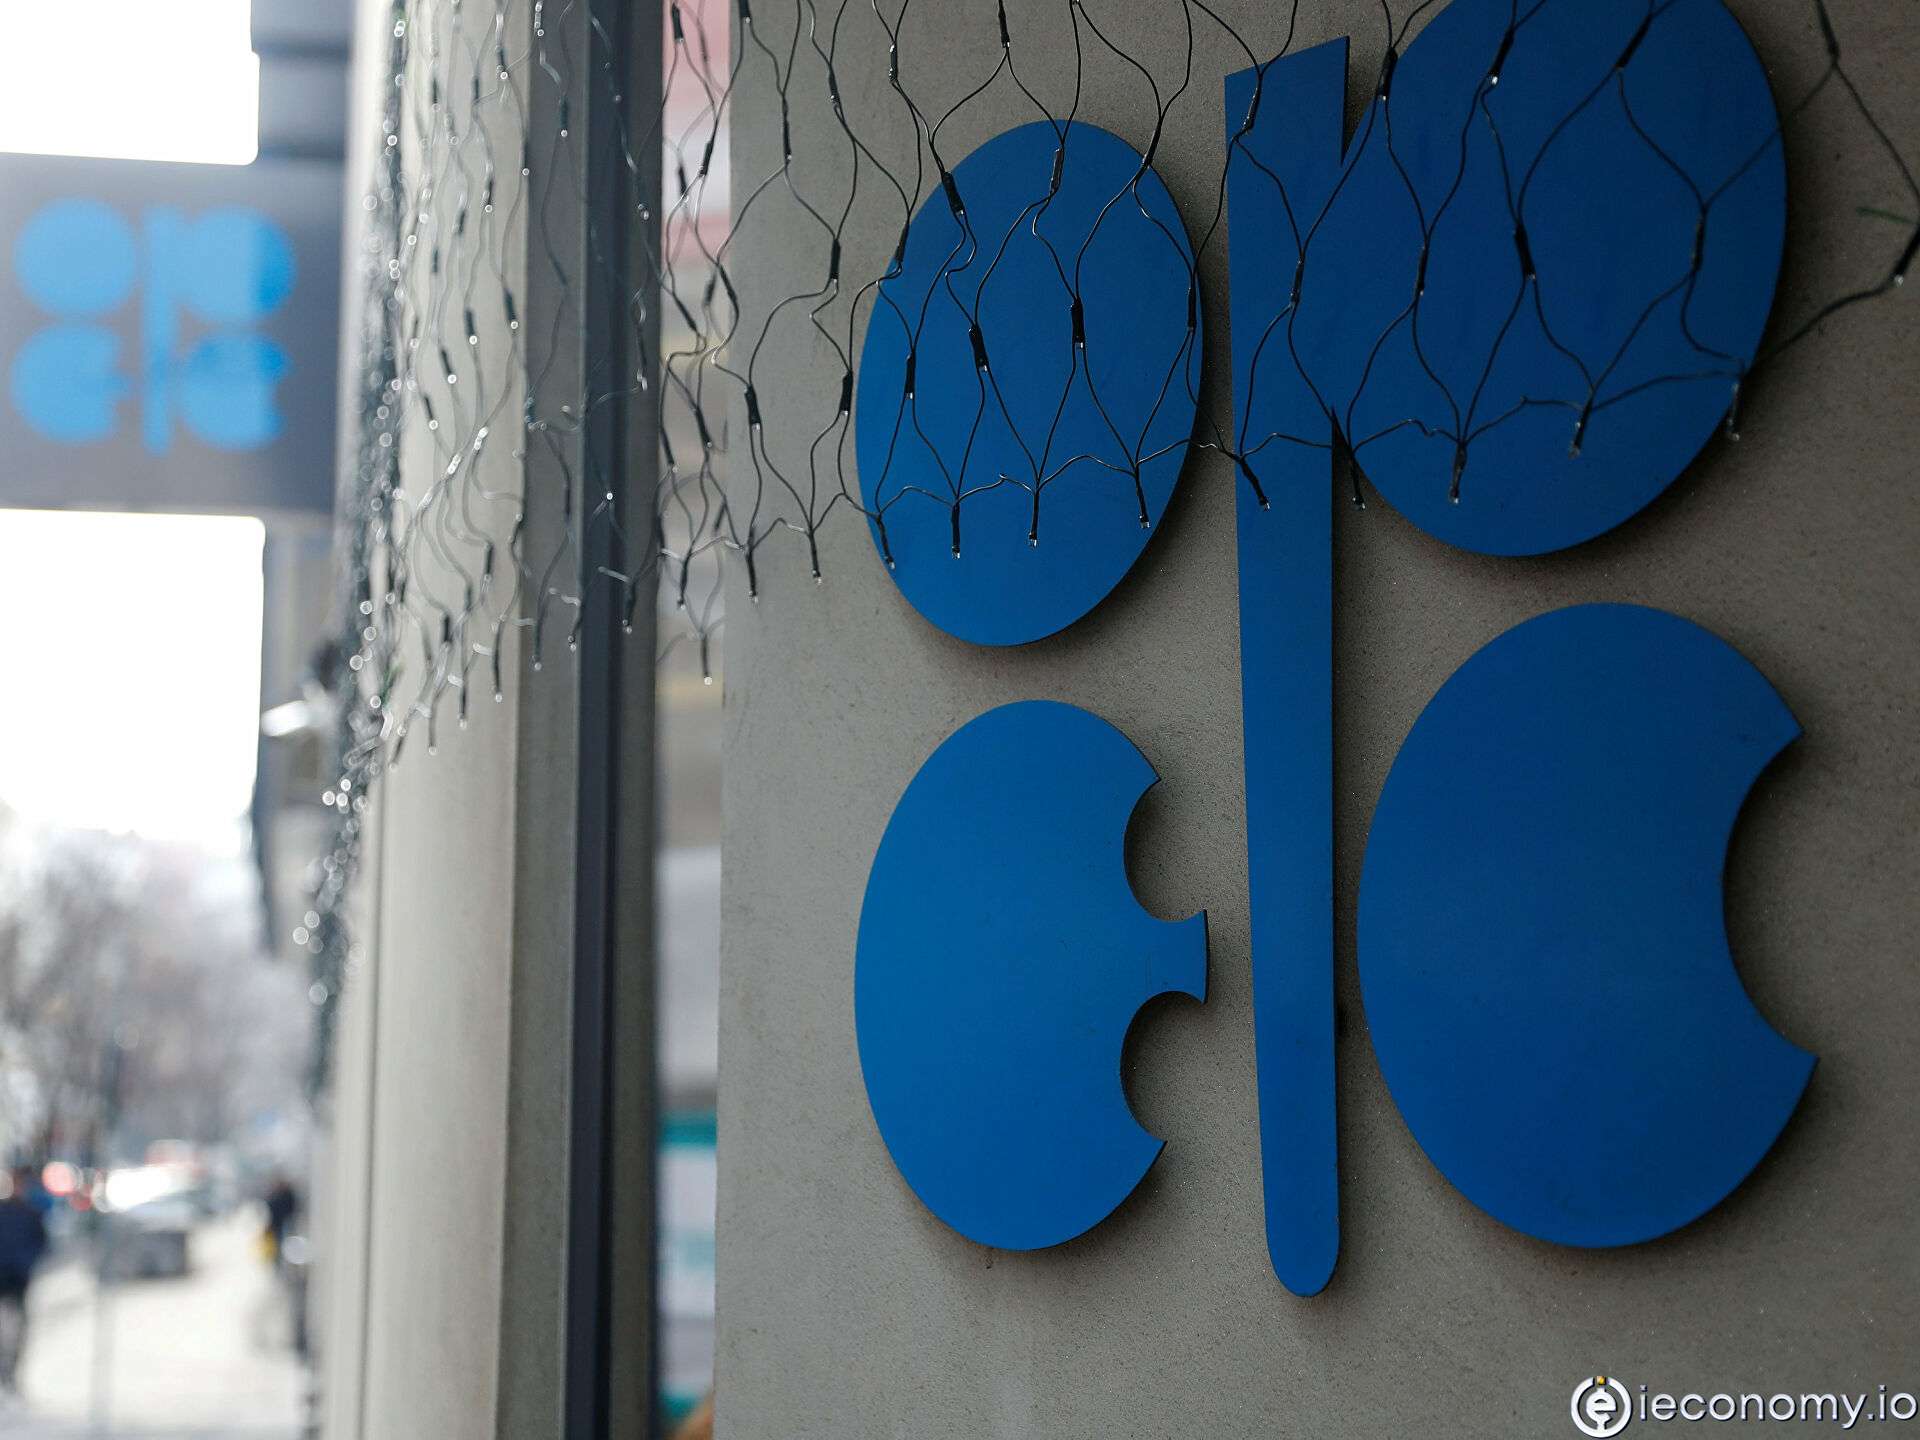 OPEC + have confirmed the original plan to increase production